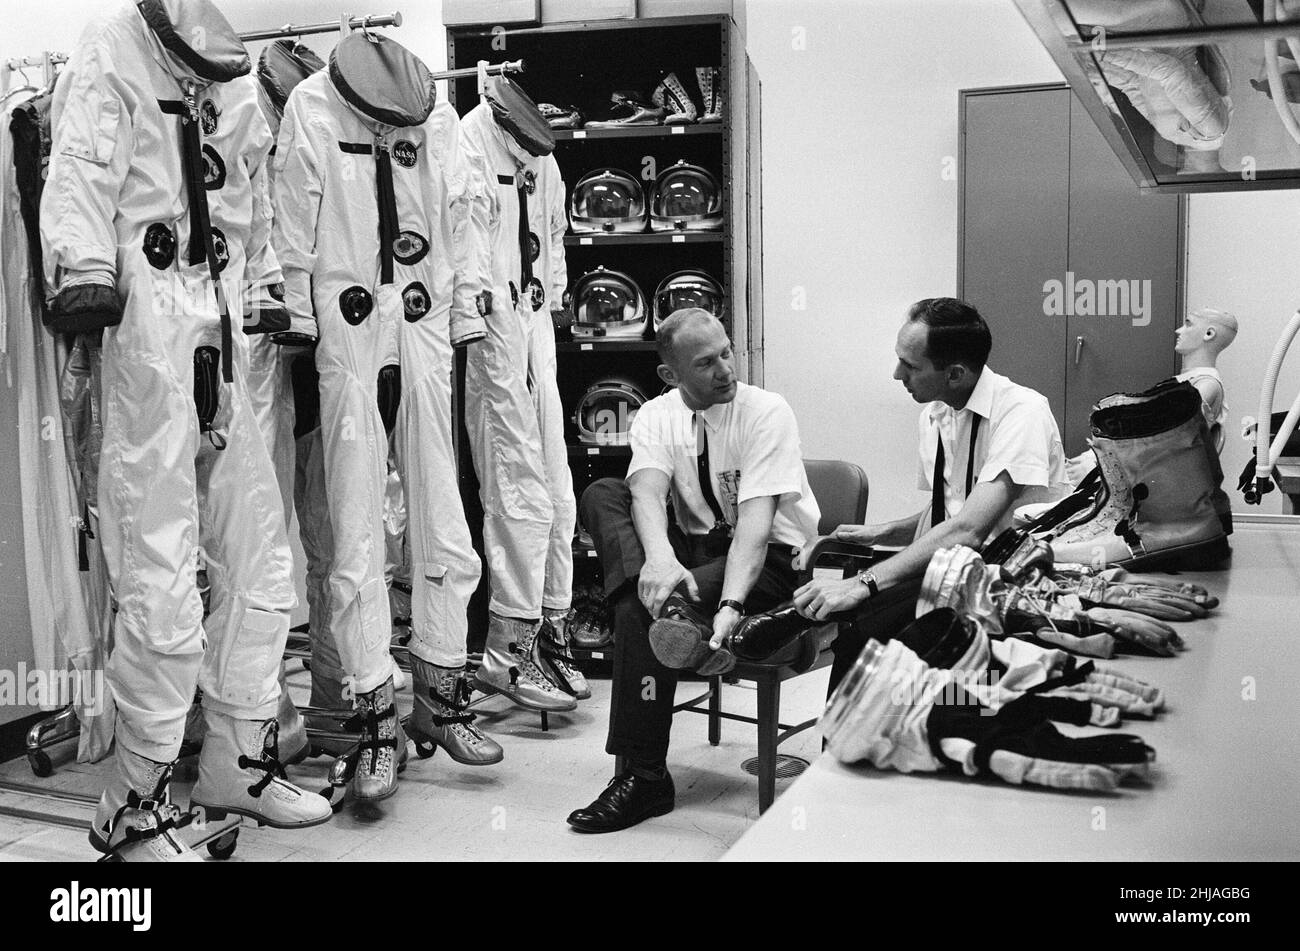 British Personnel at NASA Manned Spacecraft Center, where human spaceflight training, research, and flight control are conducted, Houston, Texas, USA, Monday 2nd November 1964. Renamed Johnson Space Center (1973) in honour of the late US President and native Texas, Lyndon B. Johnson. Stock Photo